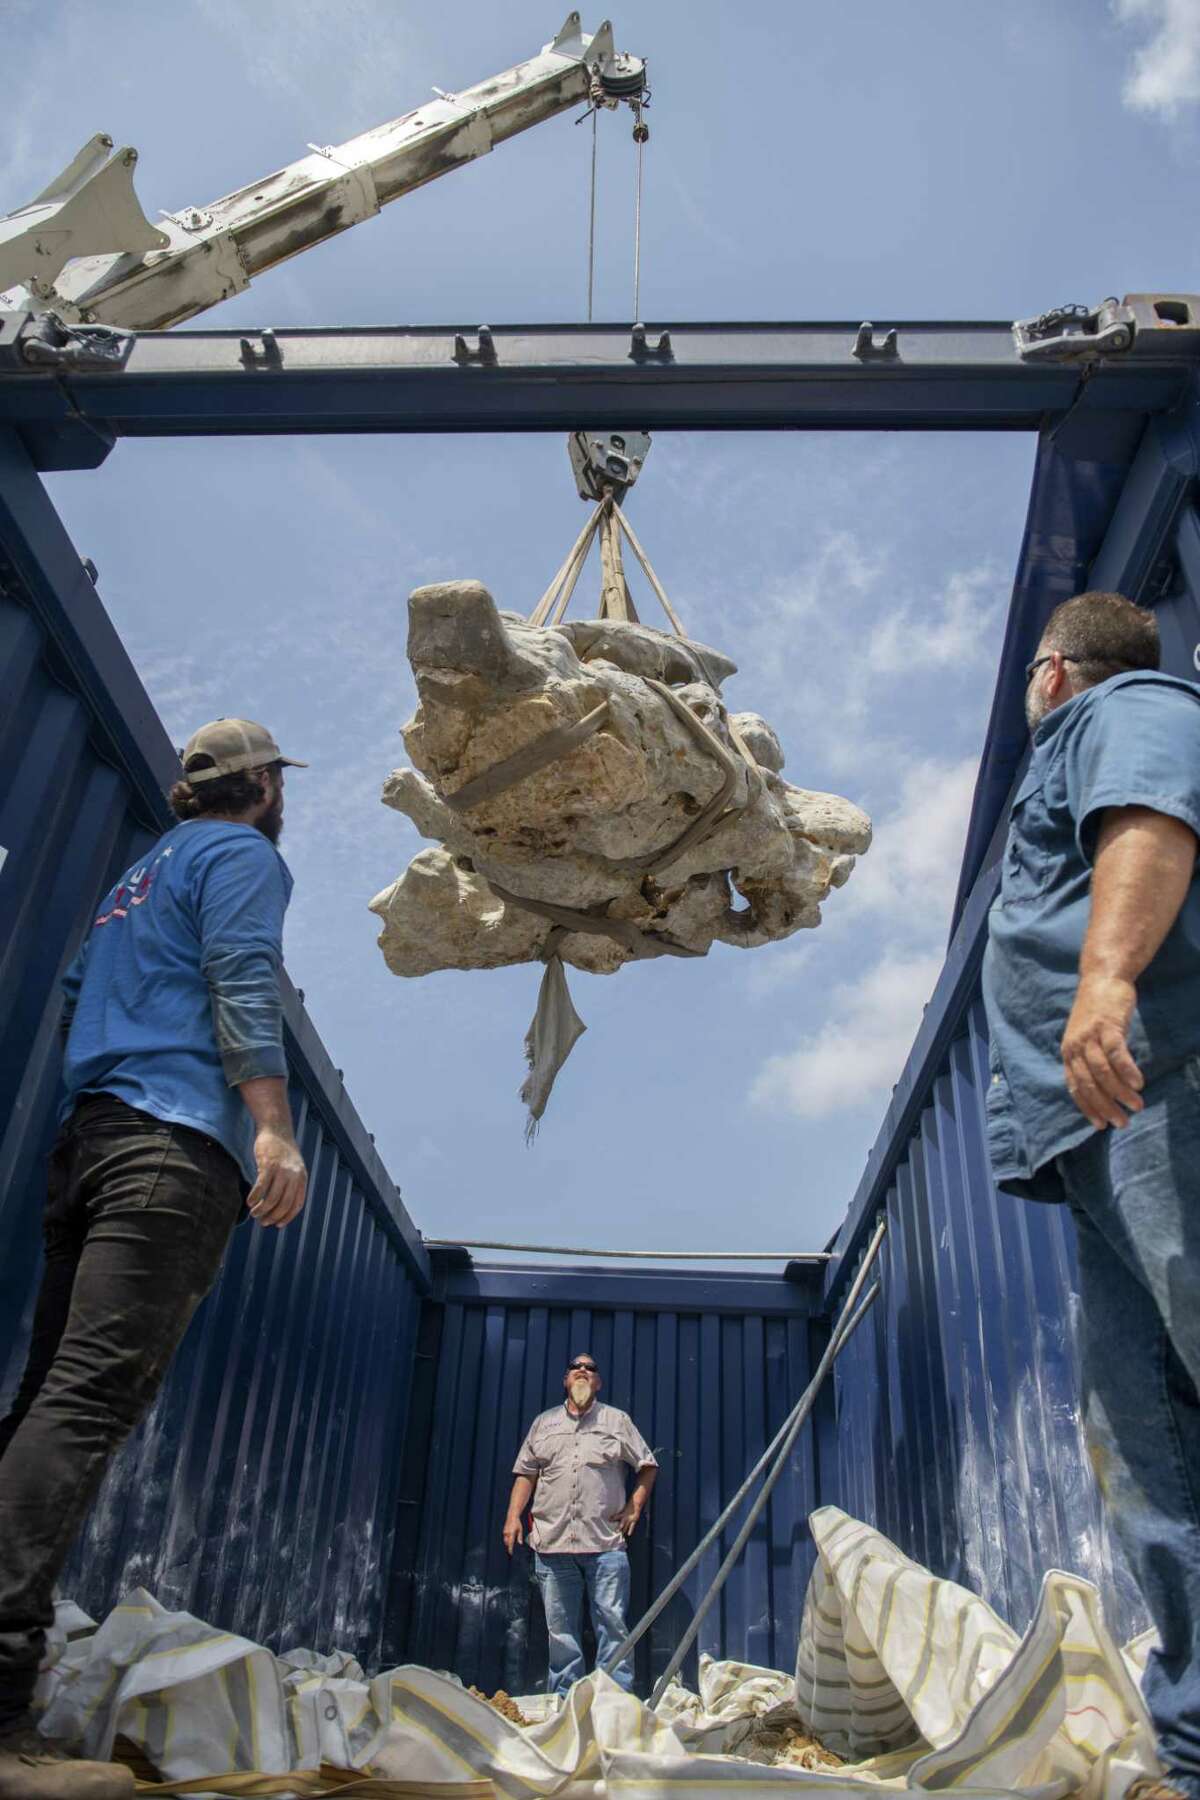 A crane was used to swiftly pull a six-and-a-half ton Scholars’ Rock from a container. The rock — which comes from a quarry near Wuxi, China — will be installed at the back of the San Antonio Museum of Art campus in November.